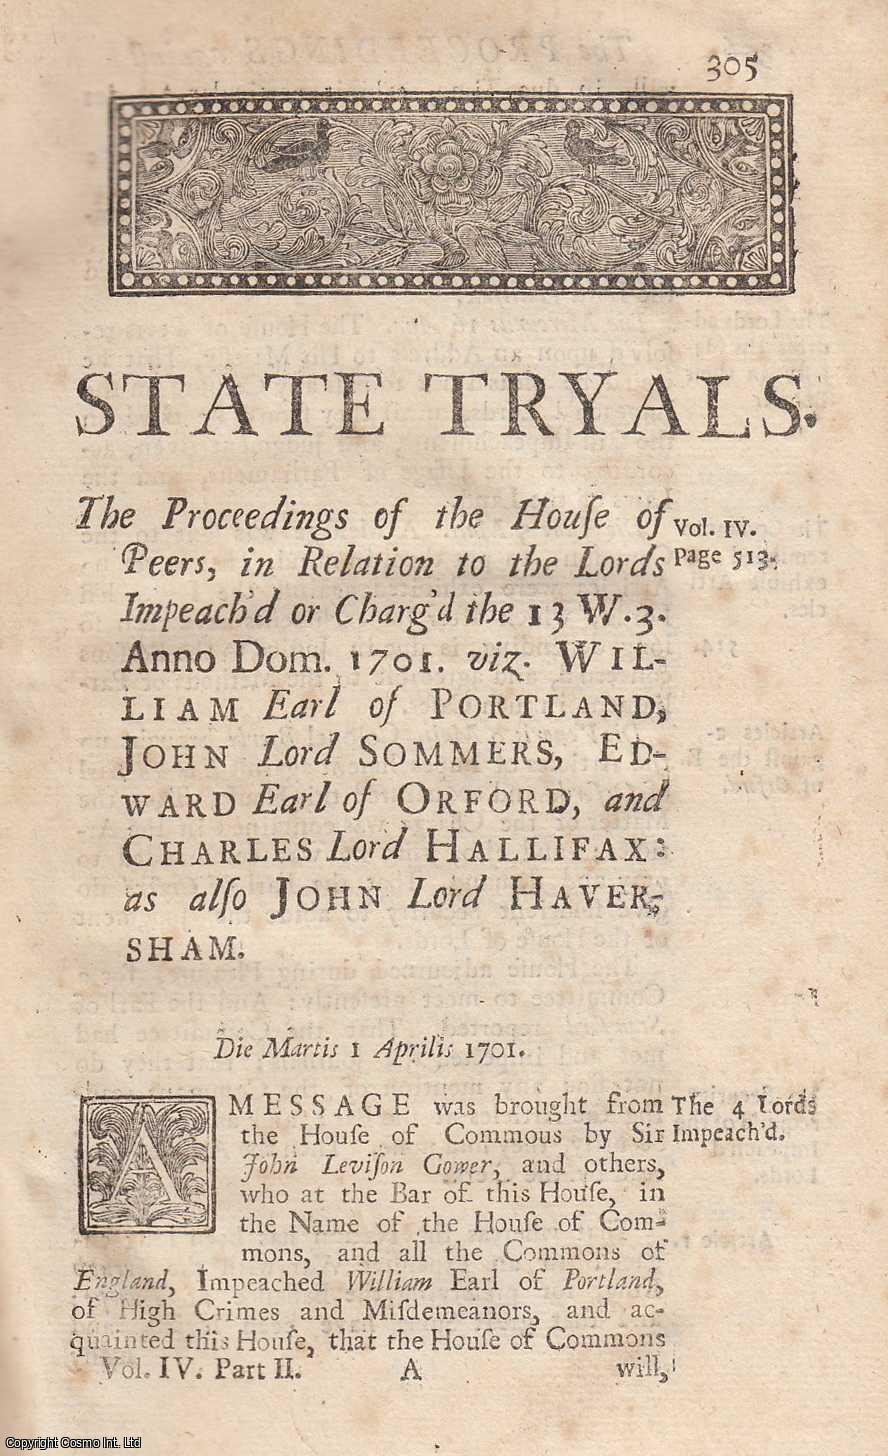 [Trial] - Proceedings in Parliament against Portland, Sommers, Orford, & Halifax, upon an Impeachment for High Crimes and Misdemeanours; as also against John Lord Haversham, for Words spoken at a Conference between the Lords & Commons, 1701. An original report from the collected Tryals for High Treason, and Other Crimes, 1720.